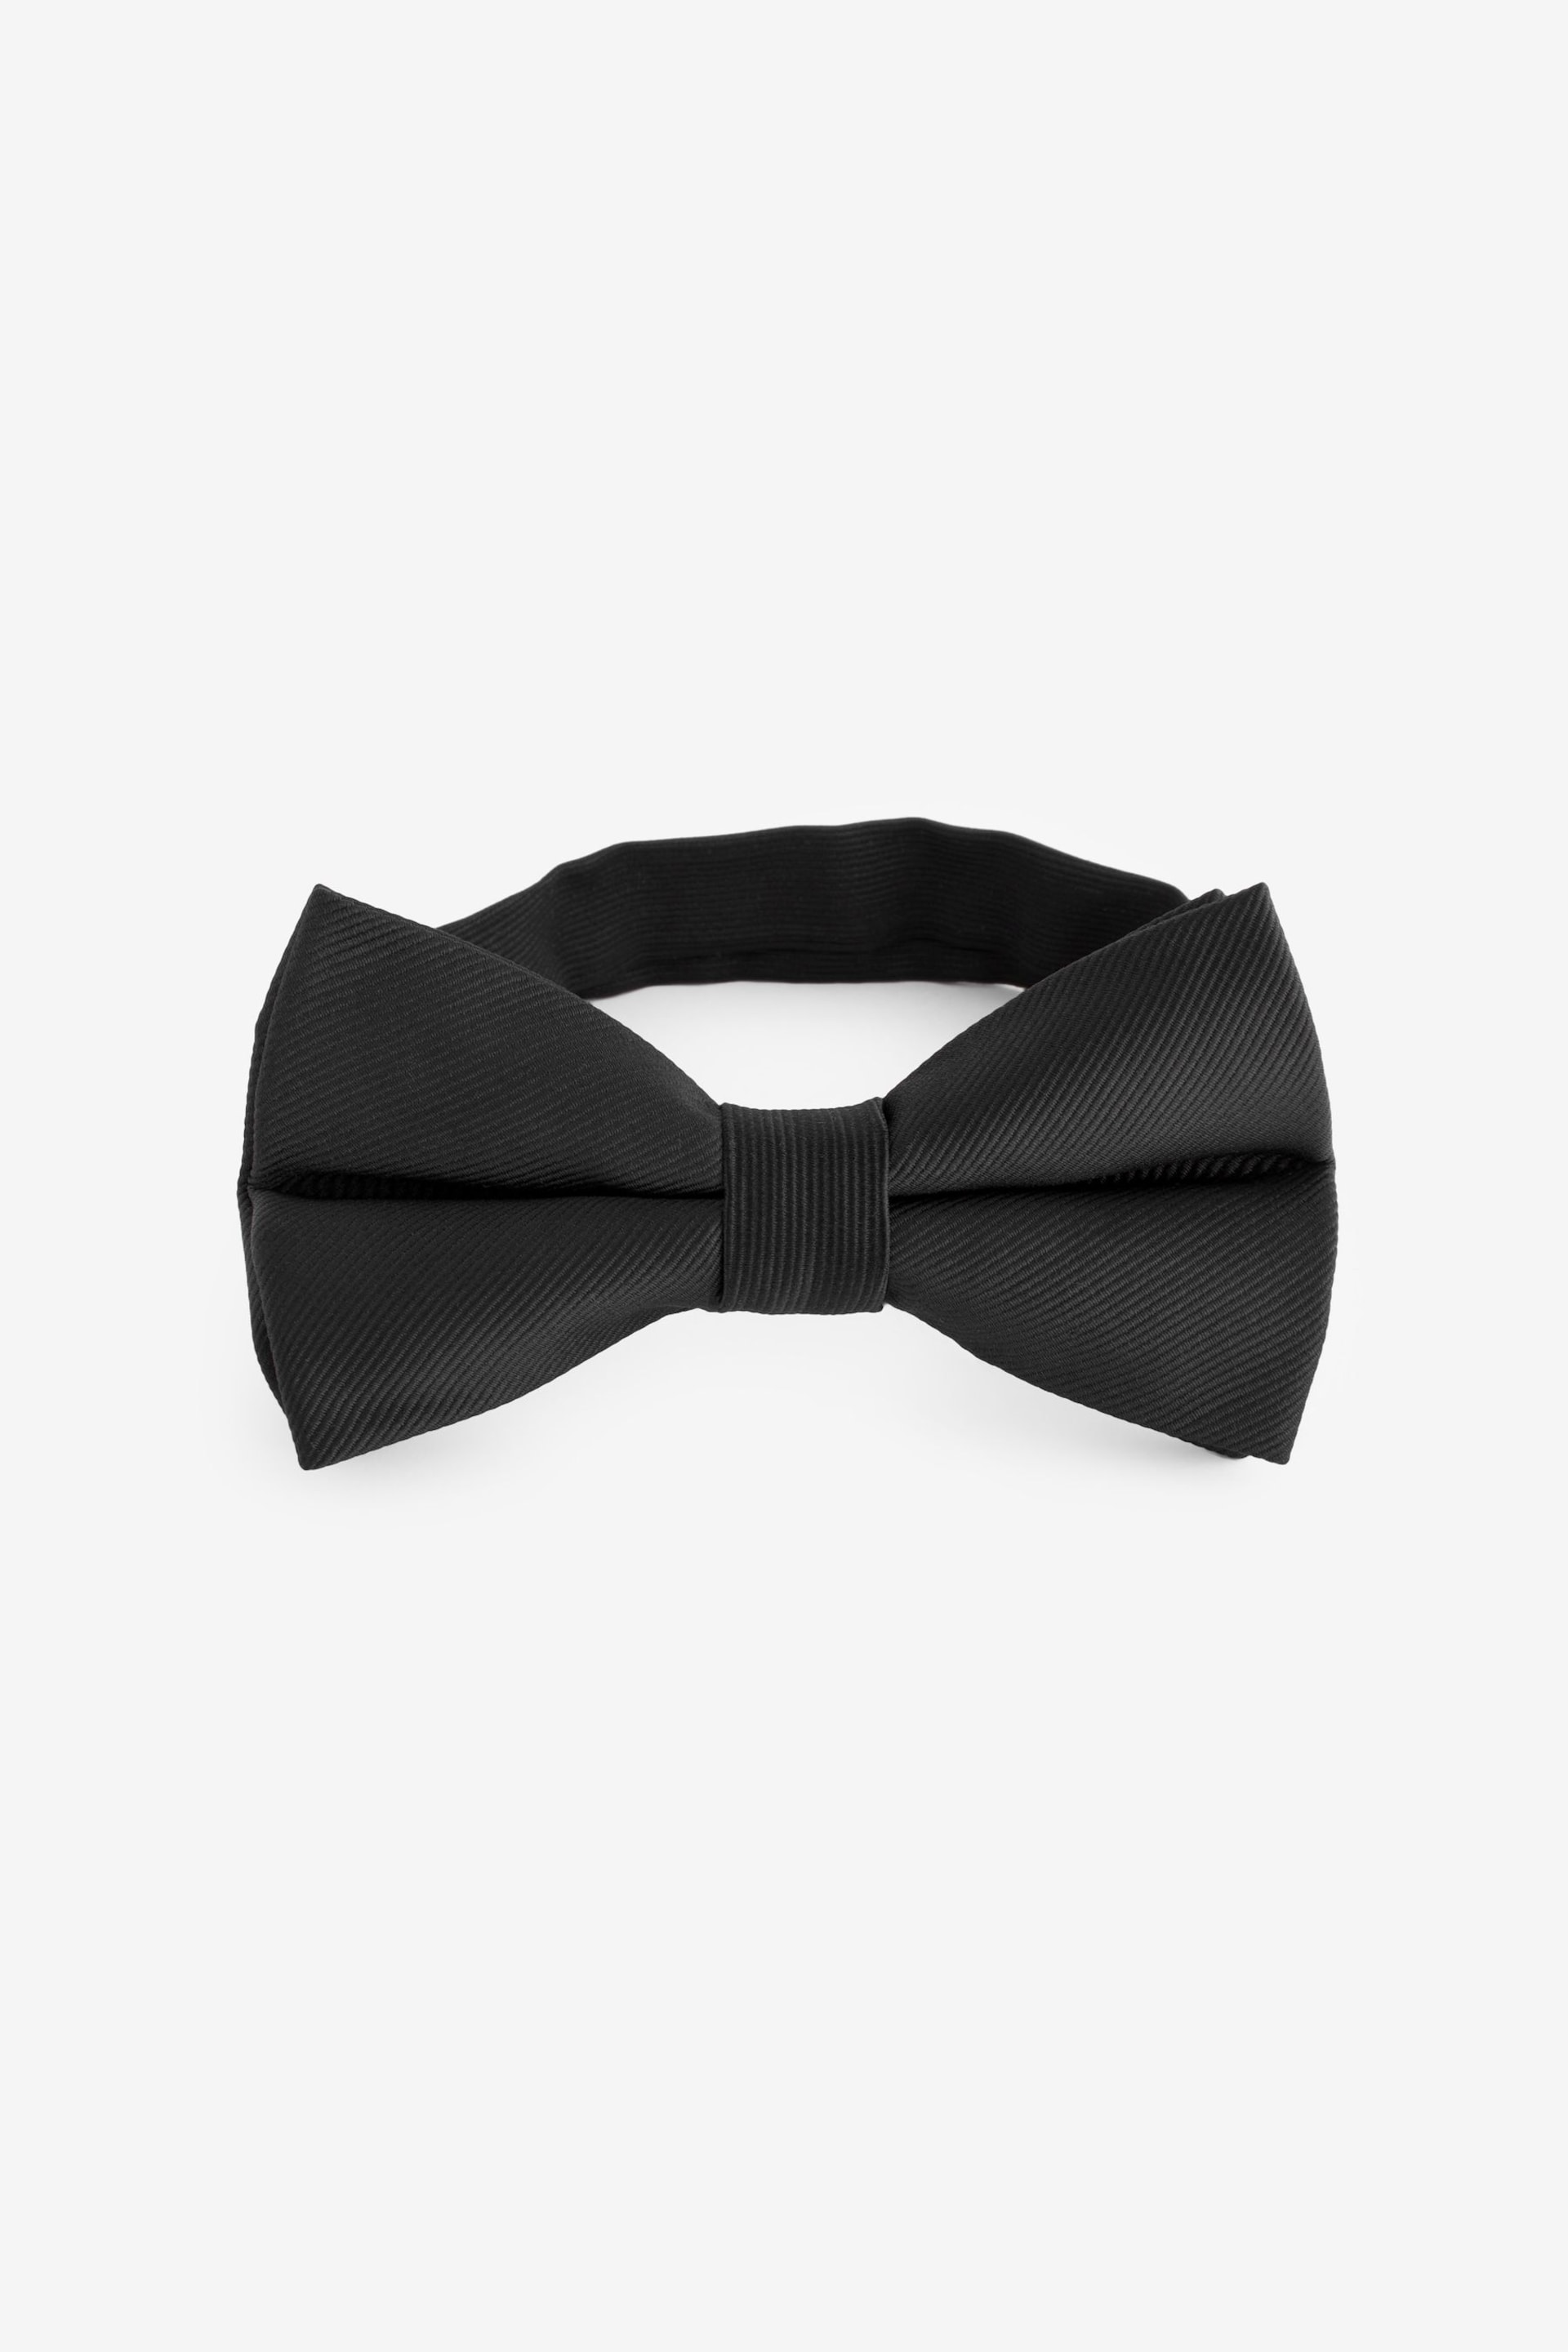 Black Recycled Polyester Twill Bow Tie - Image 2 of 5